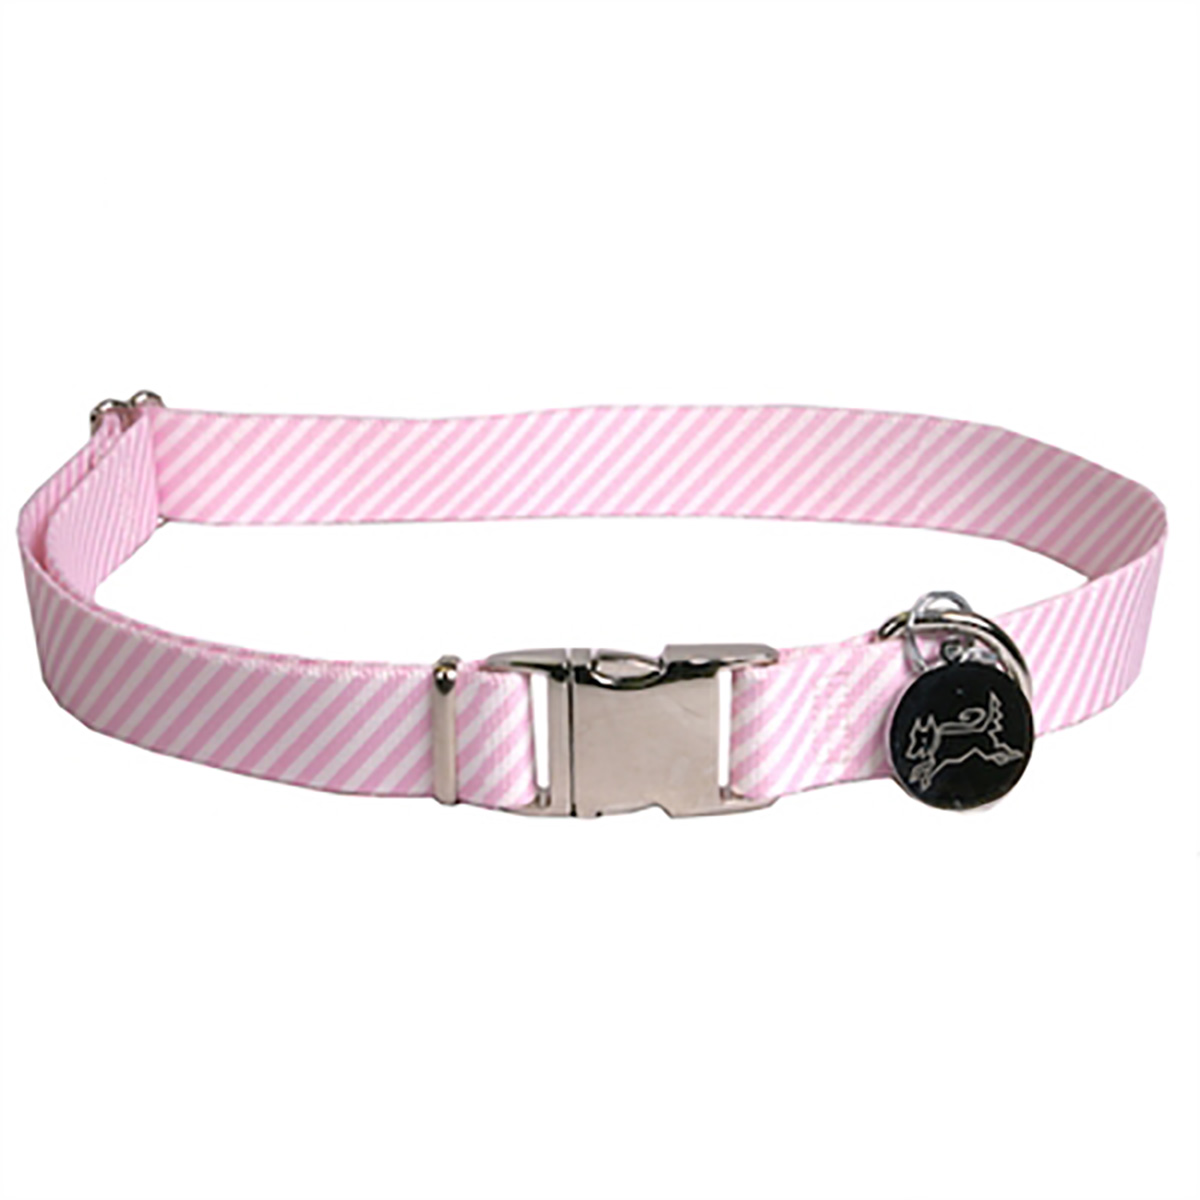 Southern Dawg Seersucker Dog Collar by Yellow Dog - Pink